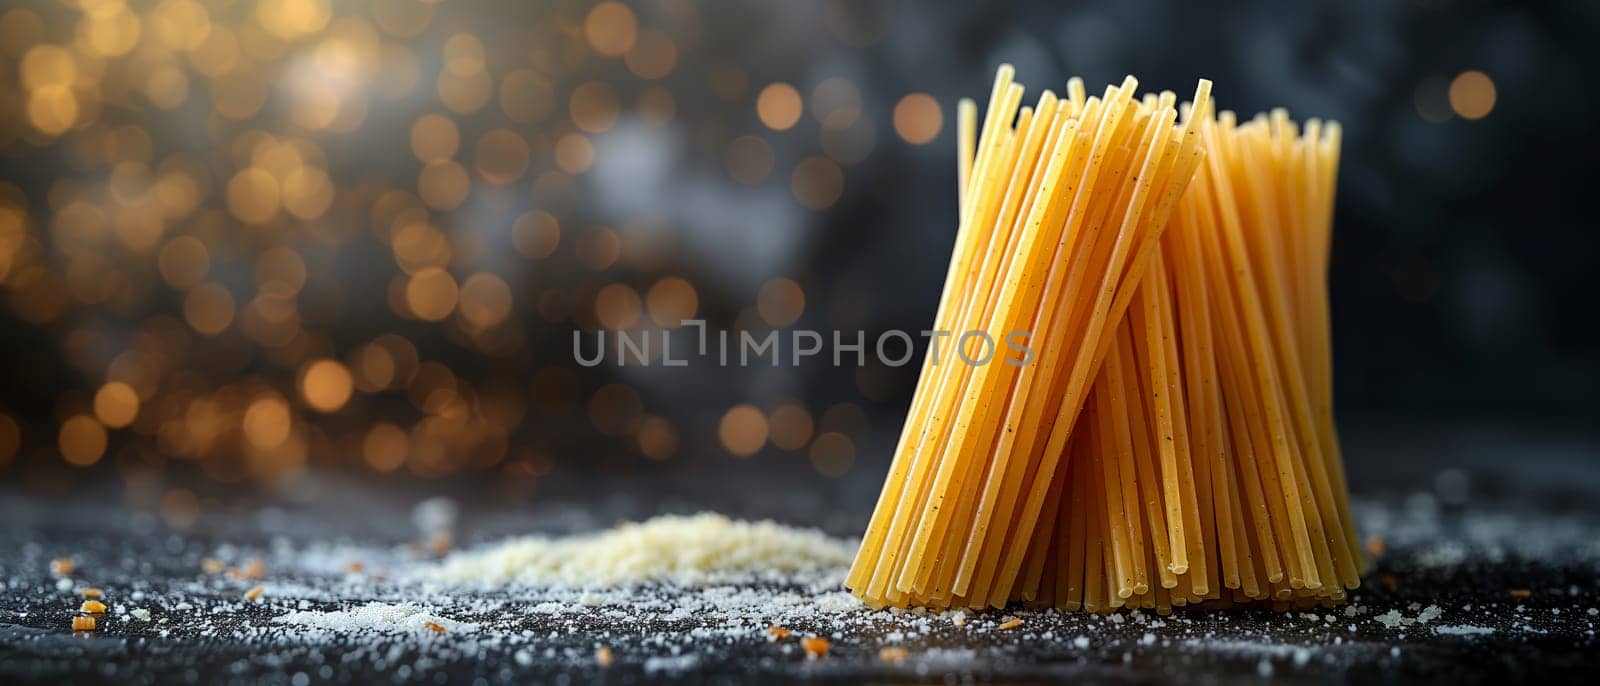 Food background with spaghetti or pasta recipe ingredient on wooden table by Fischeron